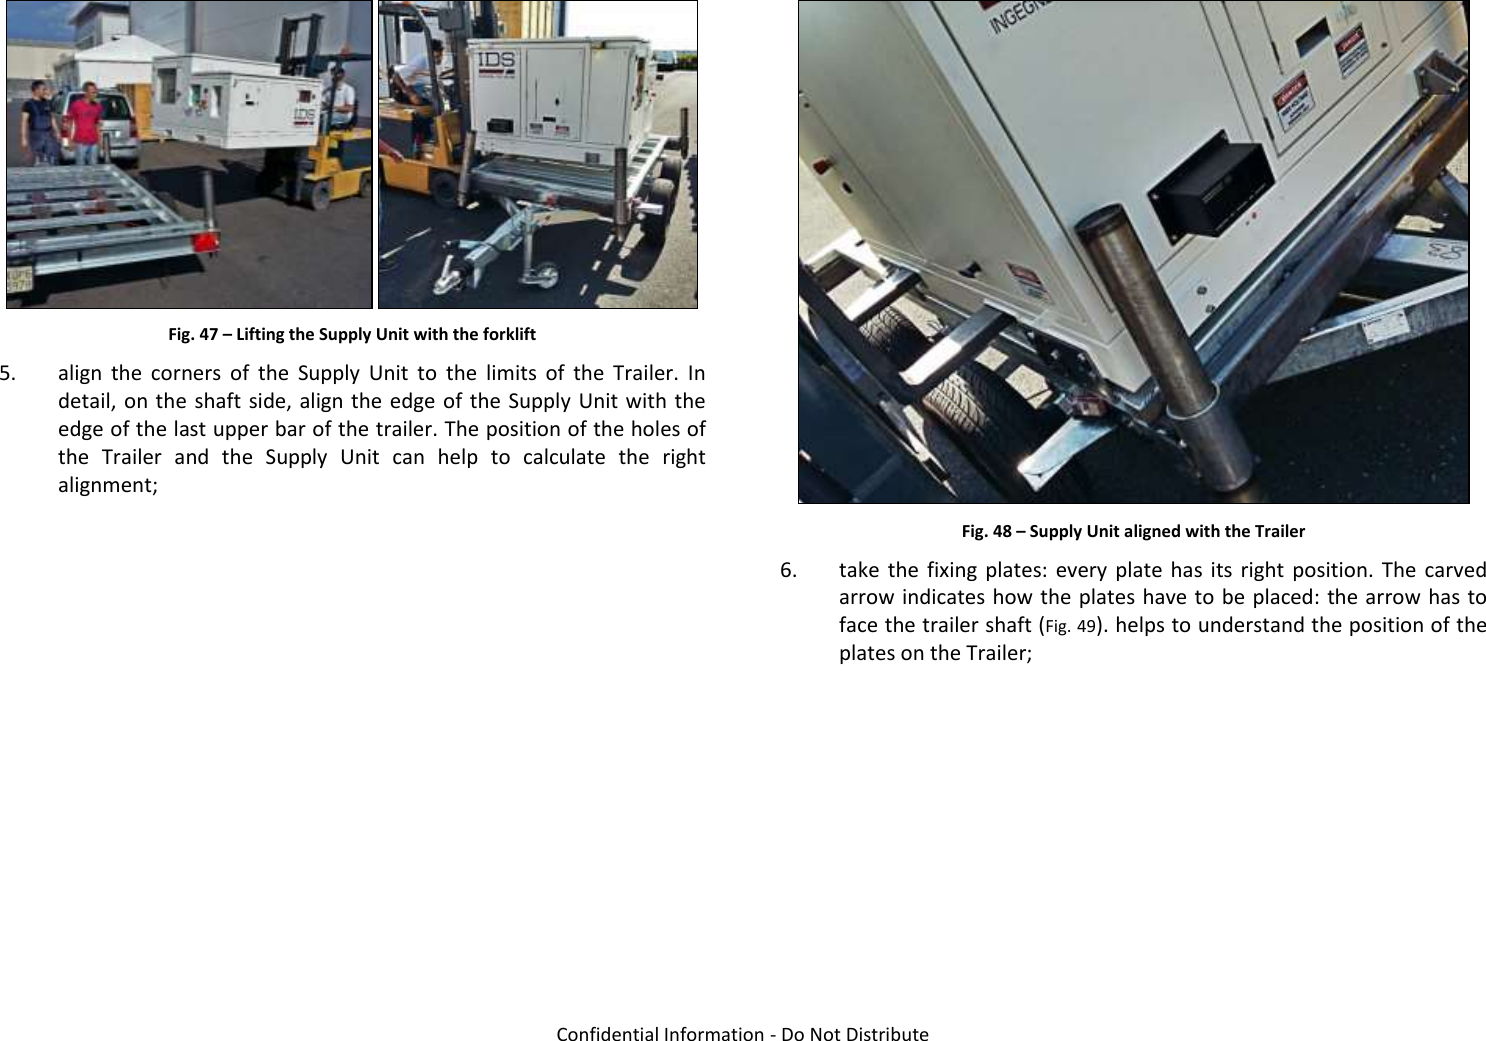   Confidential Information - Do Not Distribute  Fig. 47 – Lifting the Supply Unit with the forklift 5. align  the  corners  of  the  Supply  Unit  to  the  limits  of  the  Trailer.  In detail, on the shaft side, align  the  edge of  the  Supply Unit with the edge of the last upper bar of the trailer. The position of the holes of the  Trailer  and  the  Supply  Unit  can  help  to  calculate  the  right alignment;   Fig. 48 – Supply Unit aligned with the Trailer 6. take  the  fixing  plates:  every plate  has  its  right  position.  The  carved arrow indicates how the plates have to be placed: the arrow has to face the trailer shaft (Fig. 49). helps to understand the position of the plates on the Trailer;  